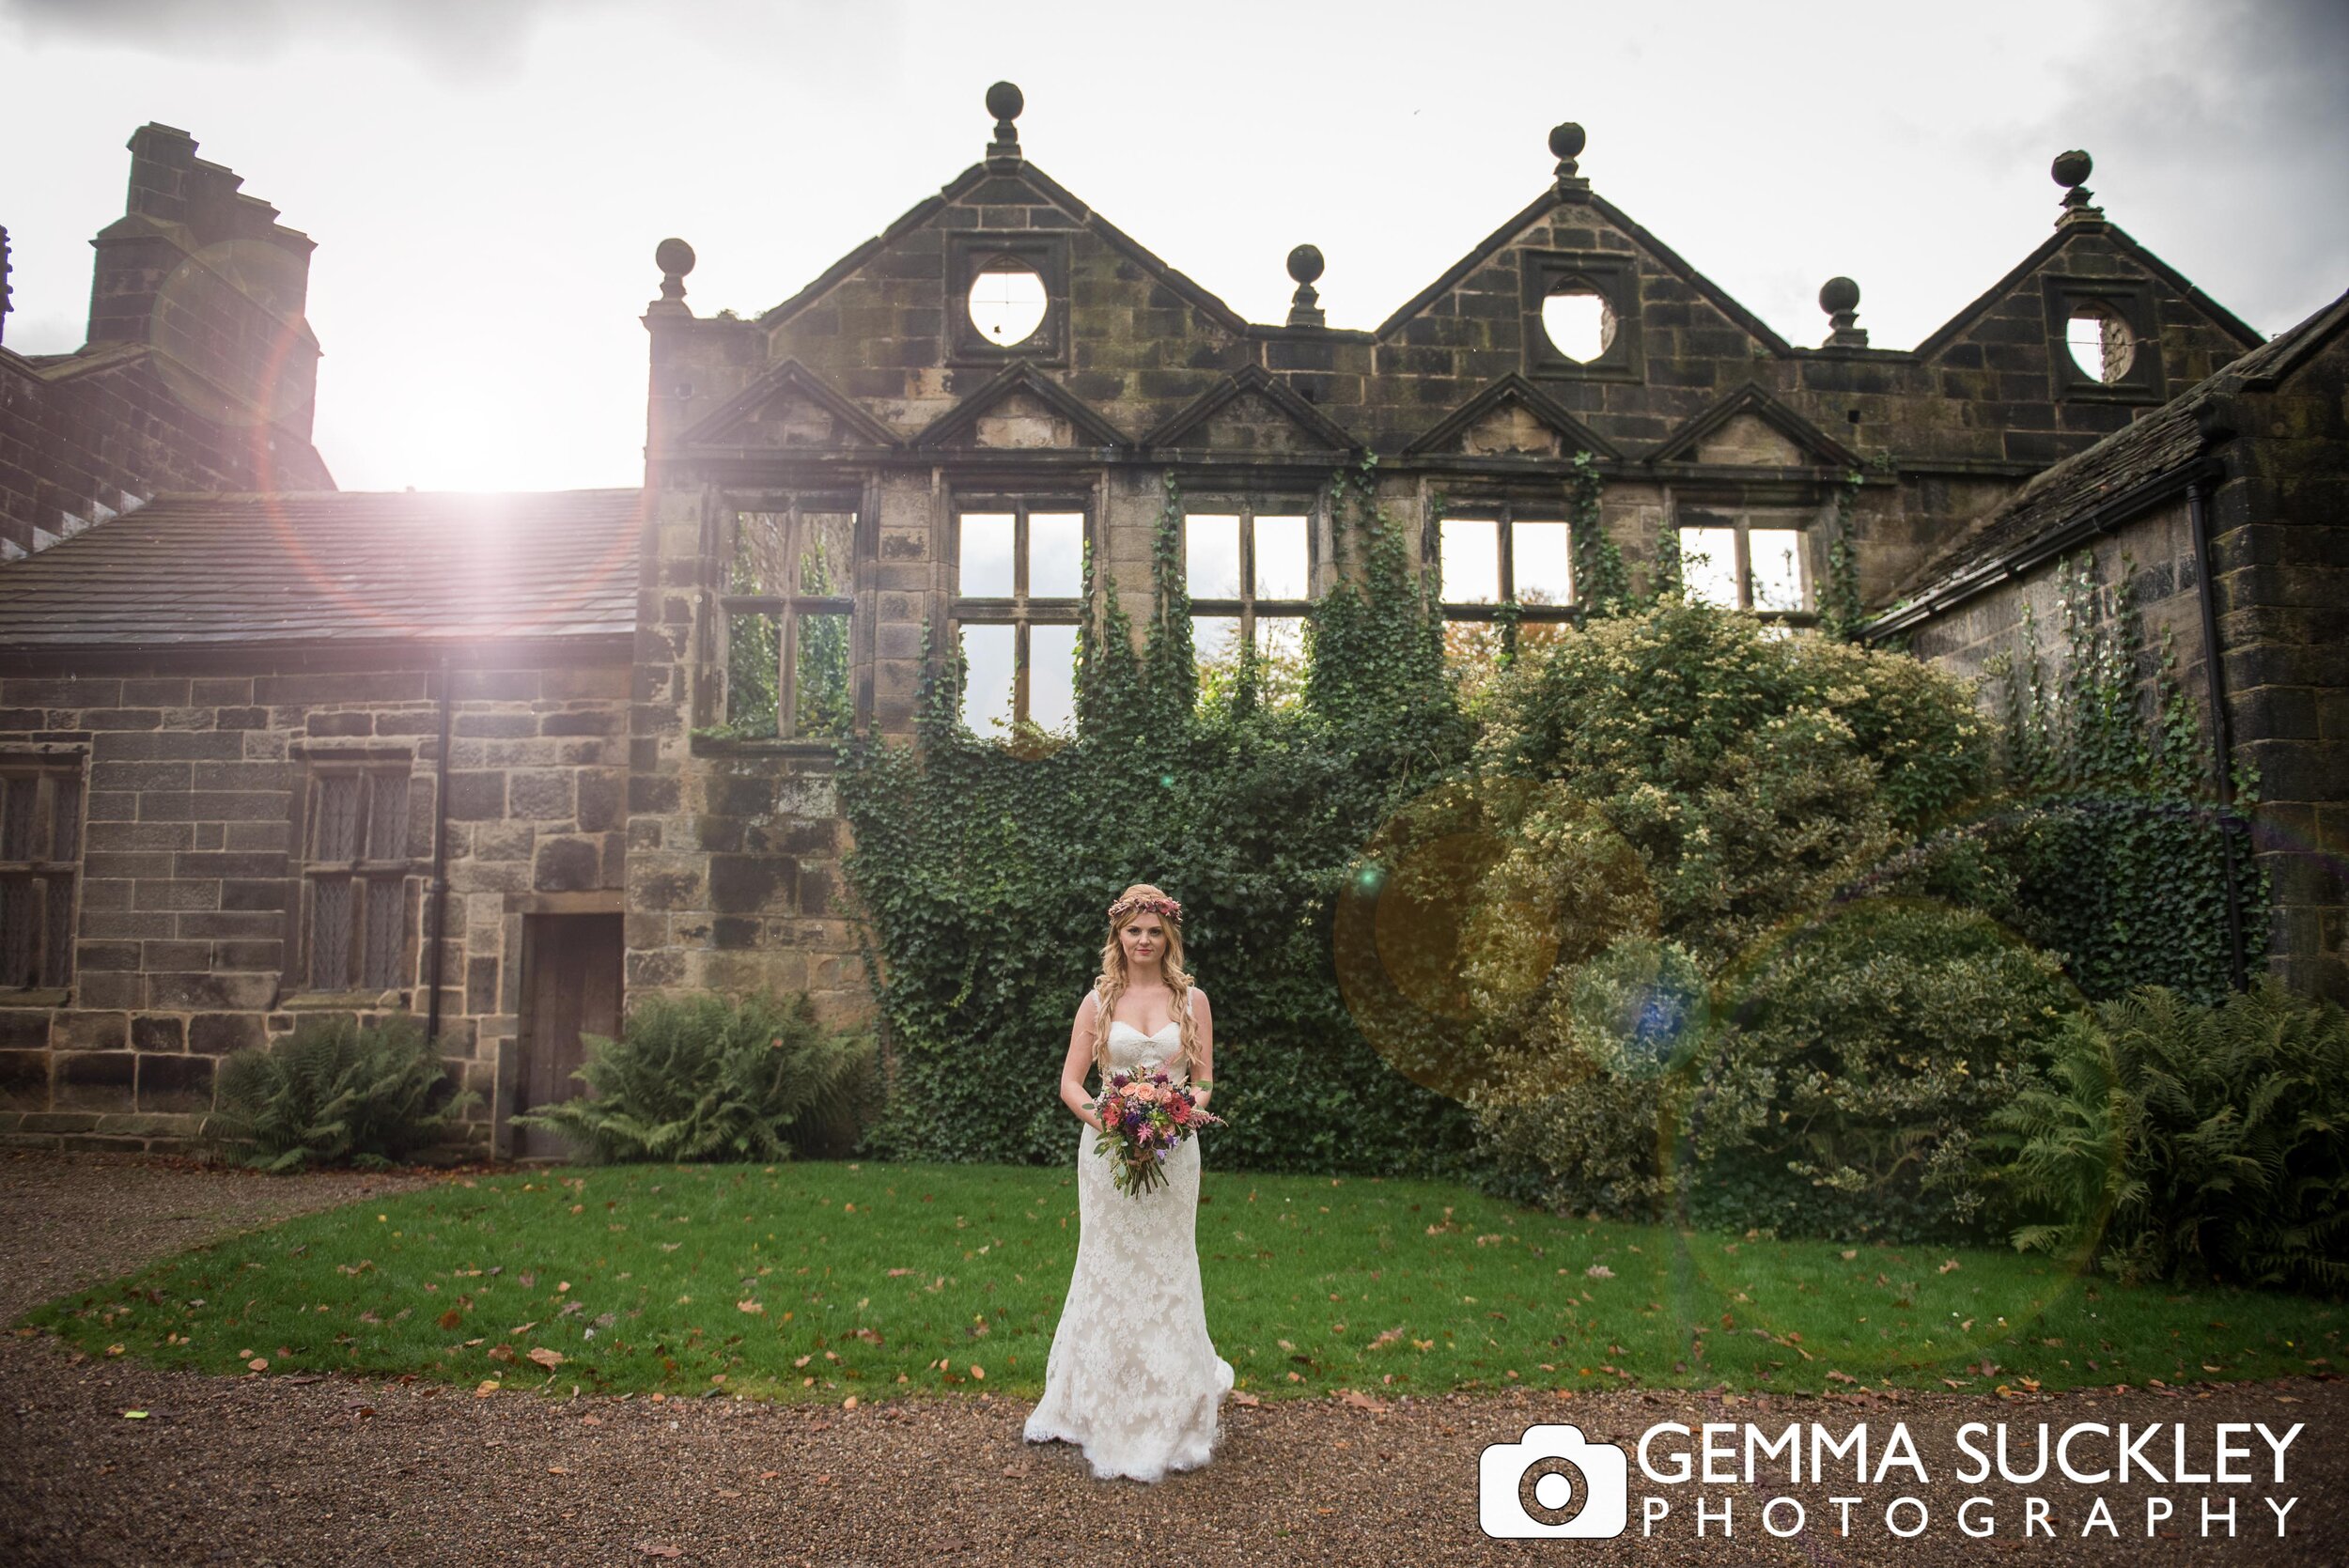 lens flare photo of bride at east riddlesden hall